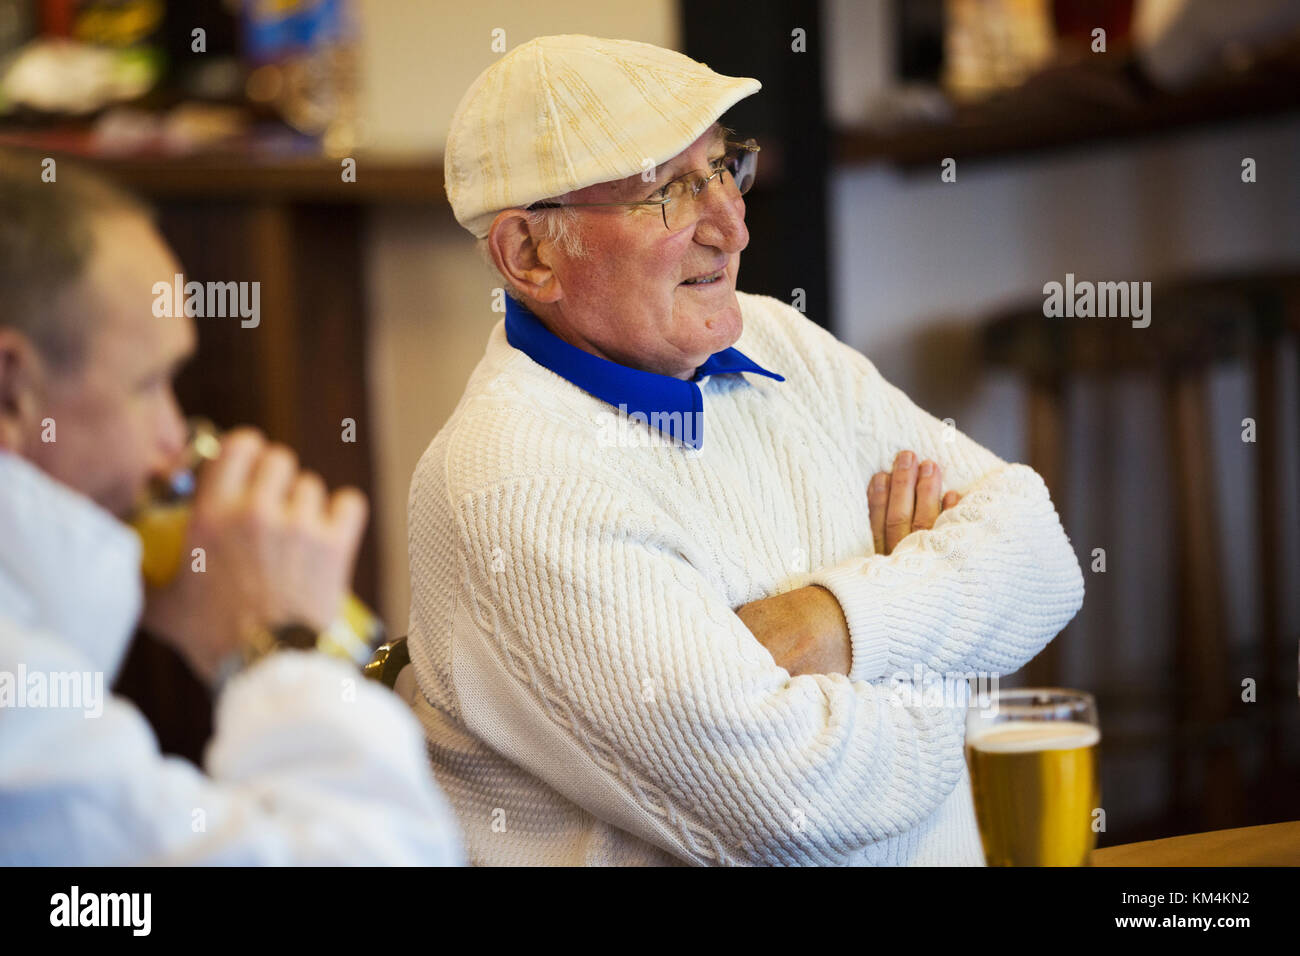 Two men at a lawn bowls club seated with pints of beer. Post match analysis. Stock Photo